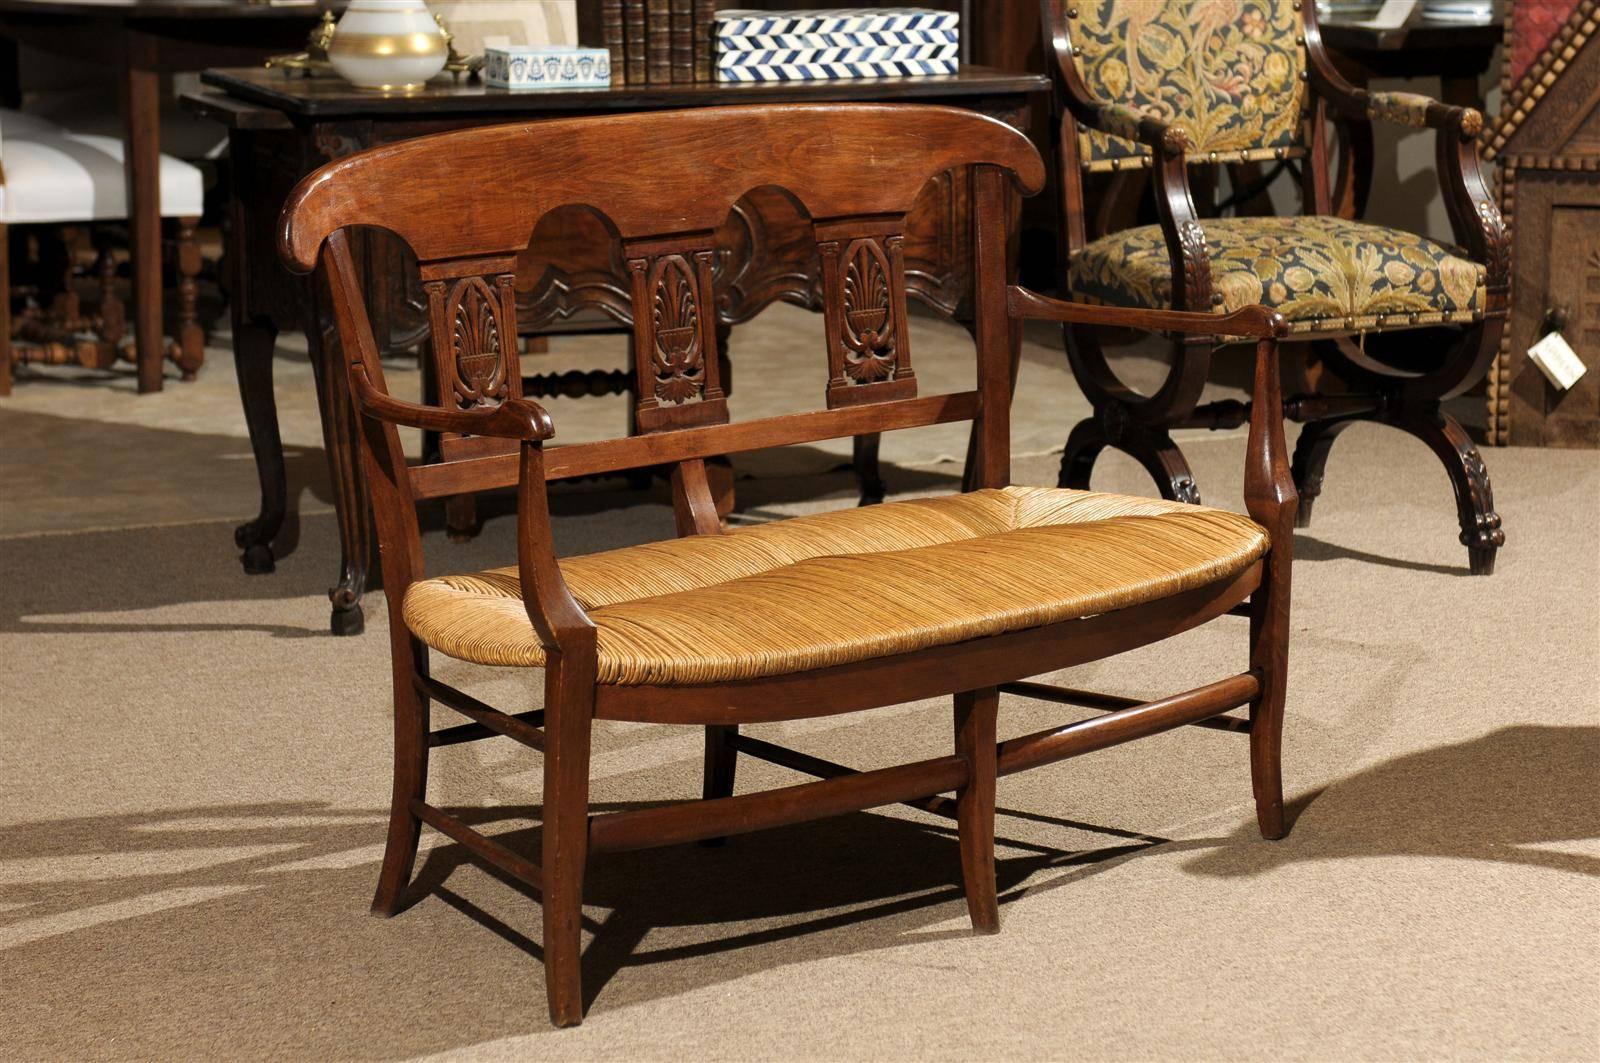 Petite Antique French Bench in Beech, circa 1900
This great two-seat French settee or bench is hand-carved in solid beech. The back has three wonderful design details and the shaped arms add to the charm. It has a classic handwoven rush seat that is